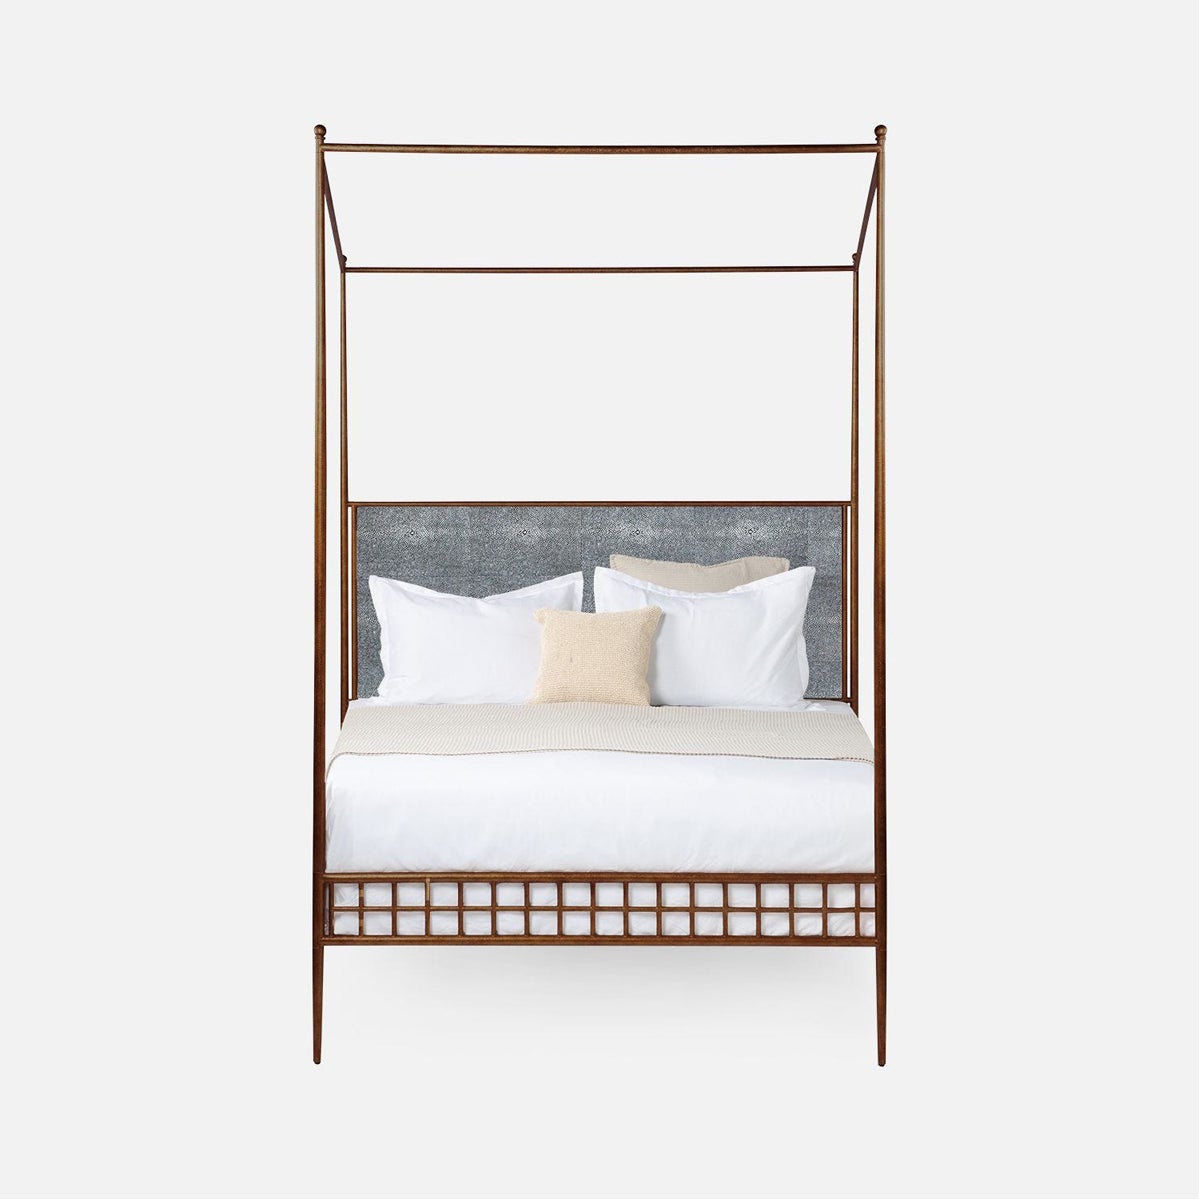 Made Goods Hamilton Textured Iron Canopy Bed in Pagua Fabric